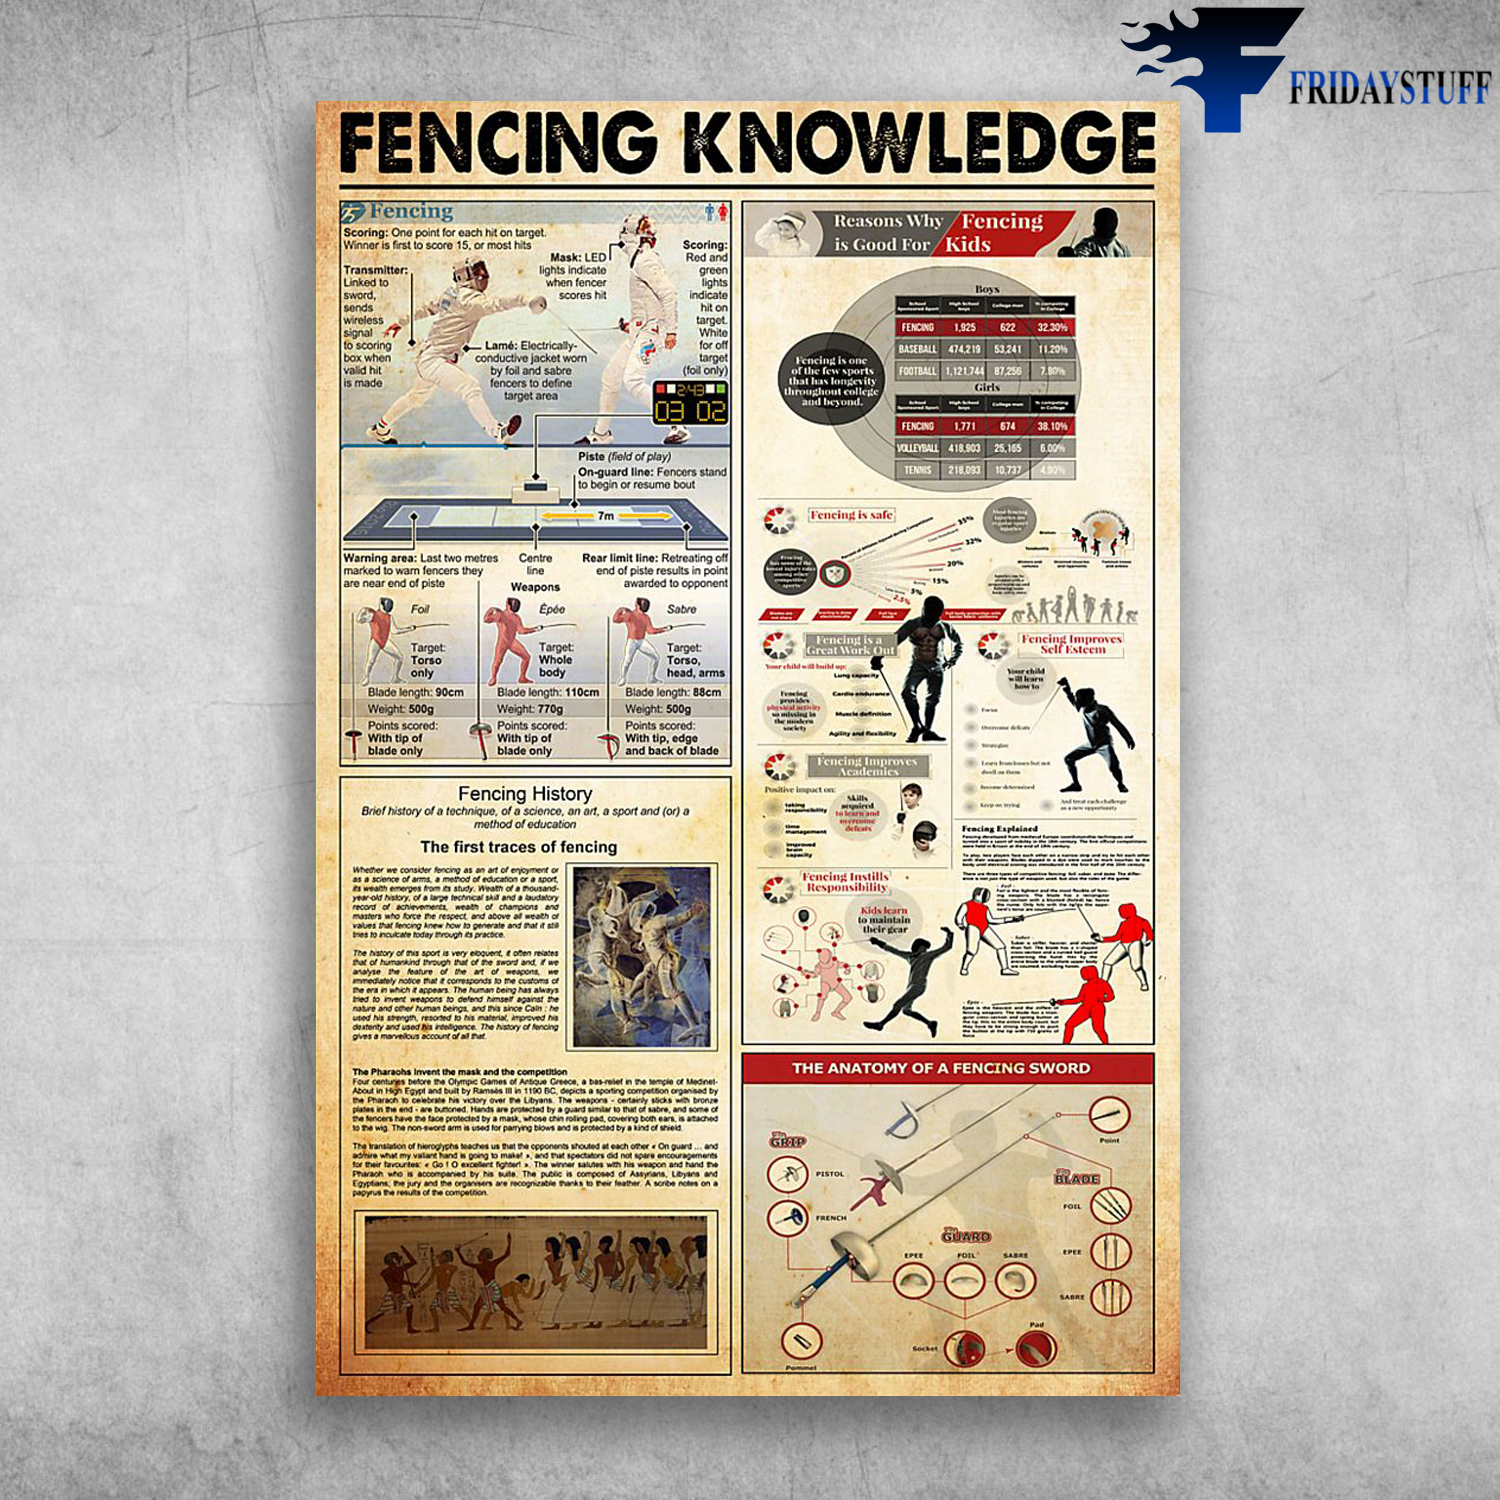 Fencing Knowledge Reasons Why Fencing Is Good For Kids